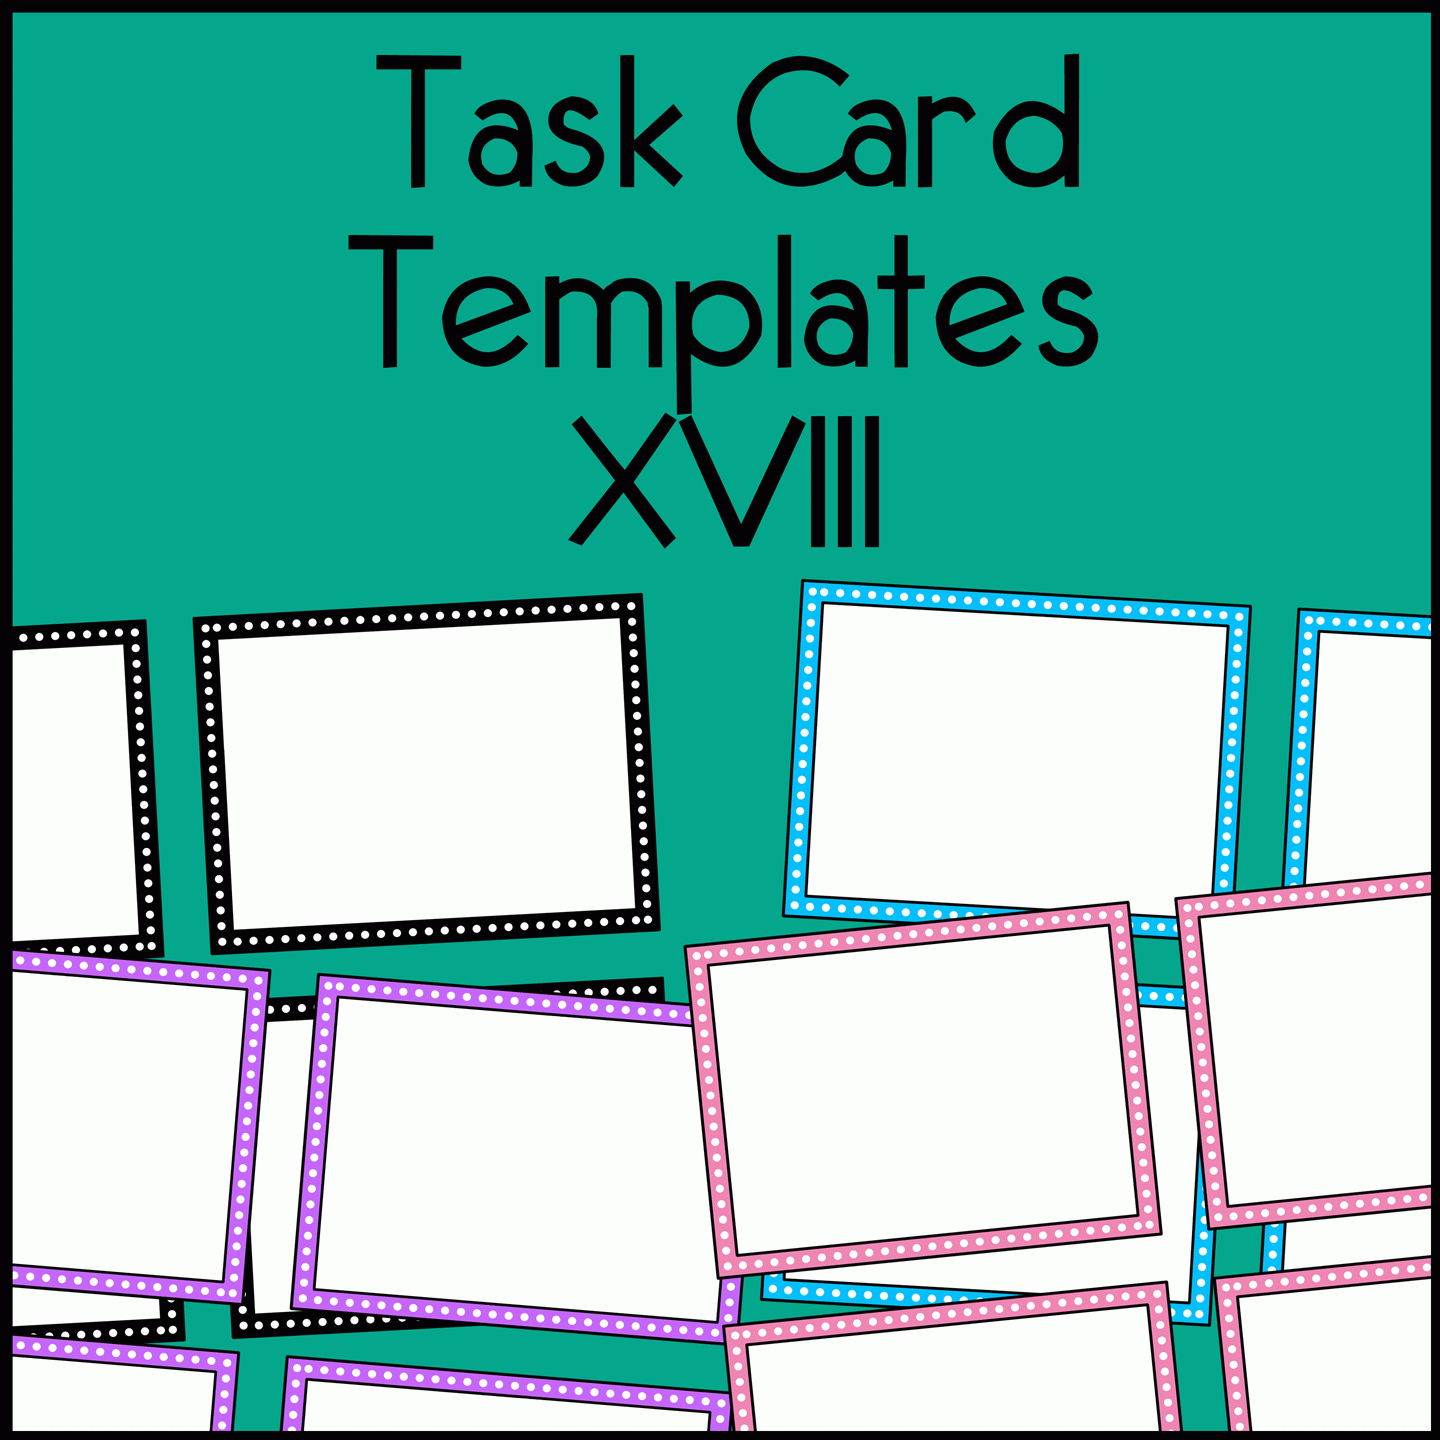 Free Printable Task Card Templates - 28 Images - Free Printable - Free Printable Blank Task Cards